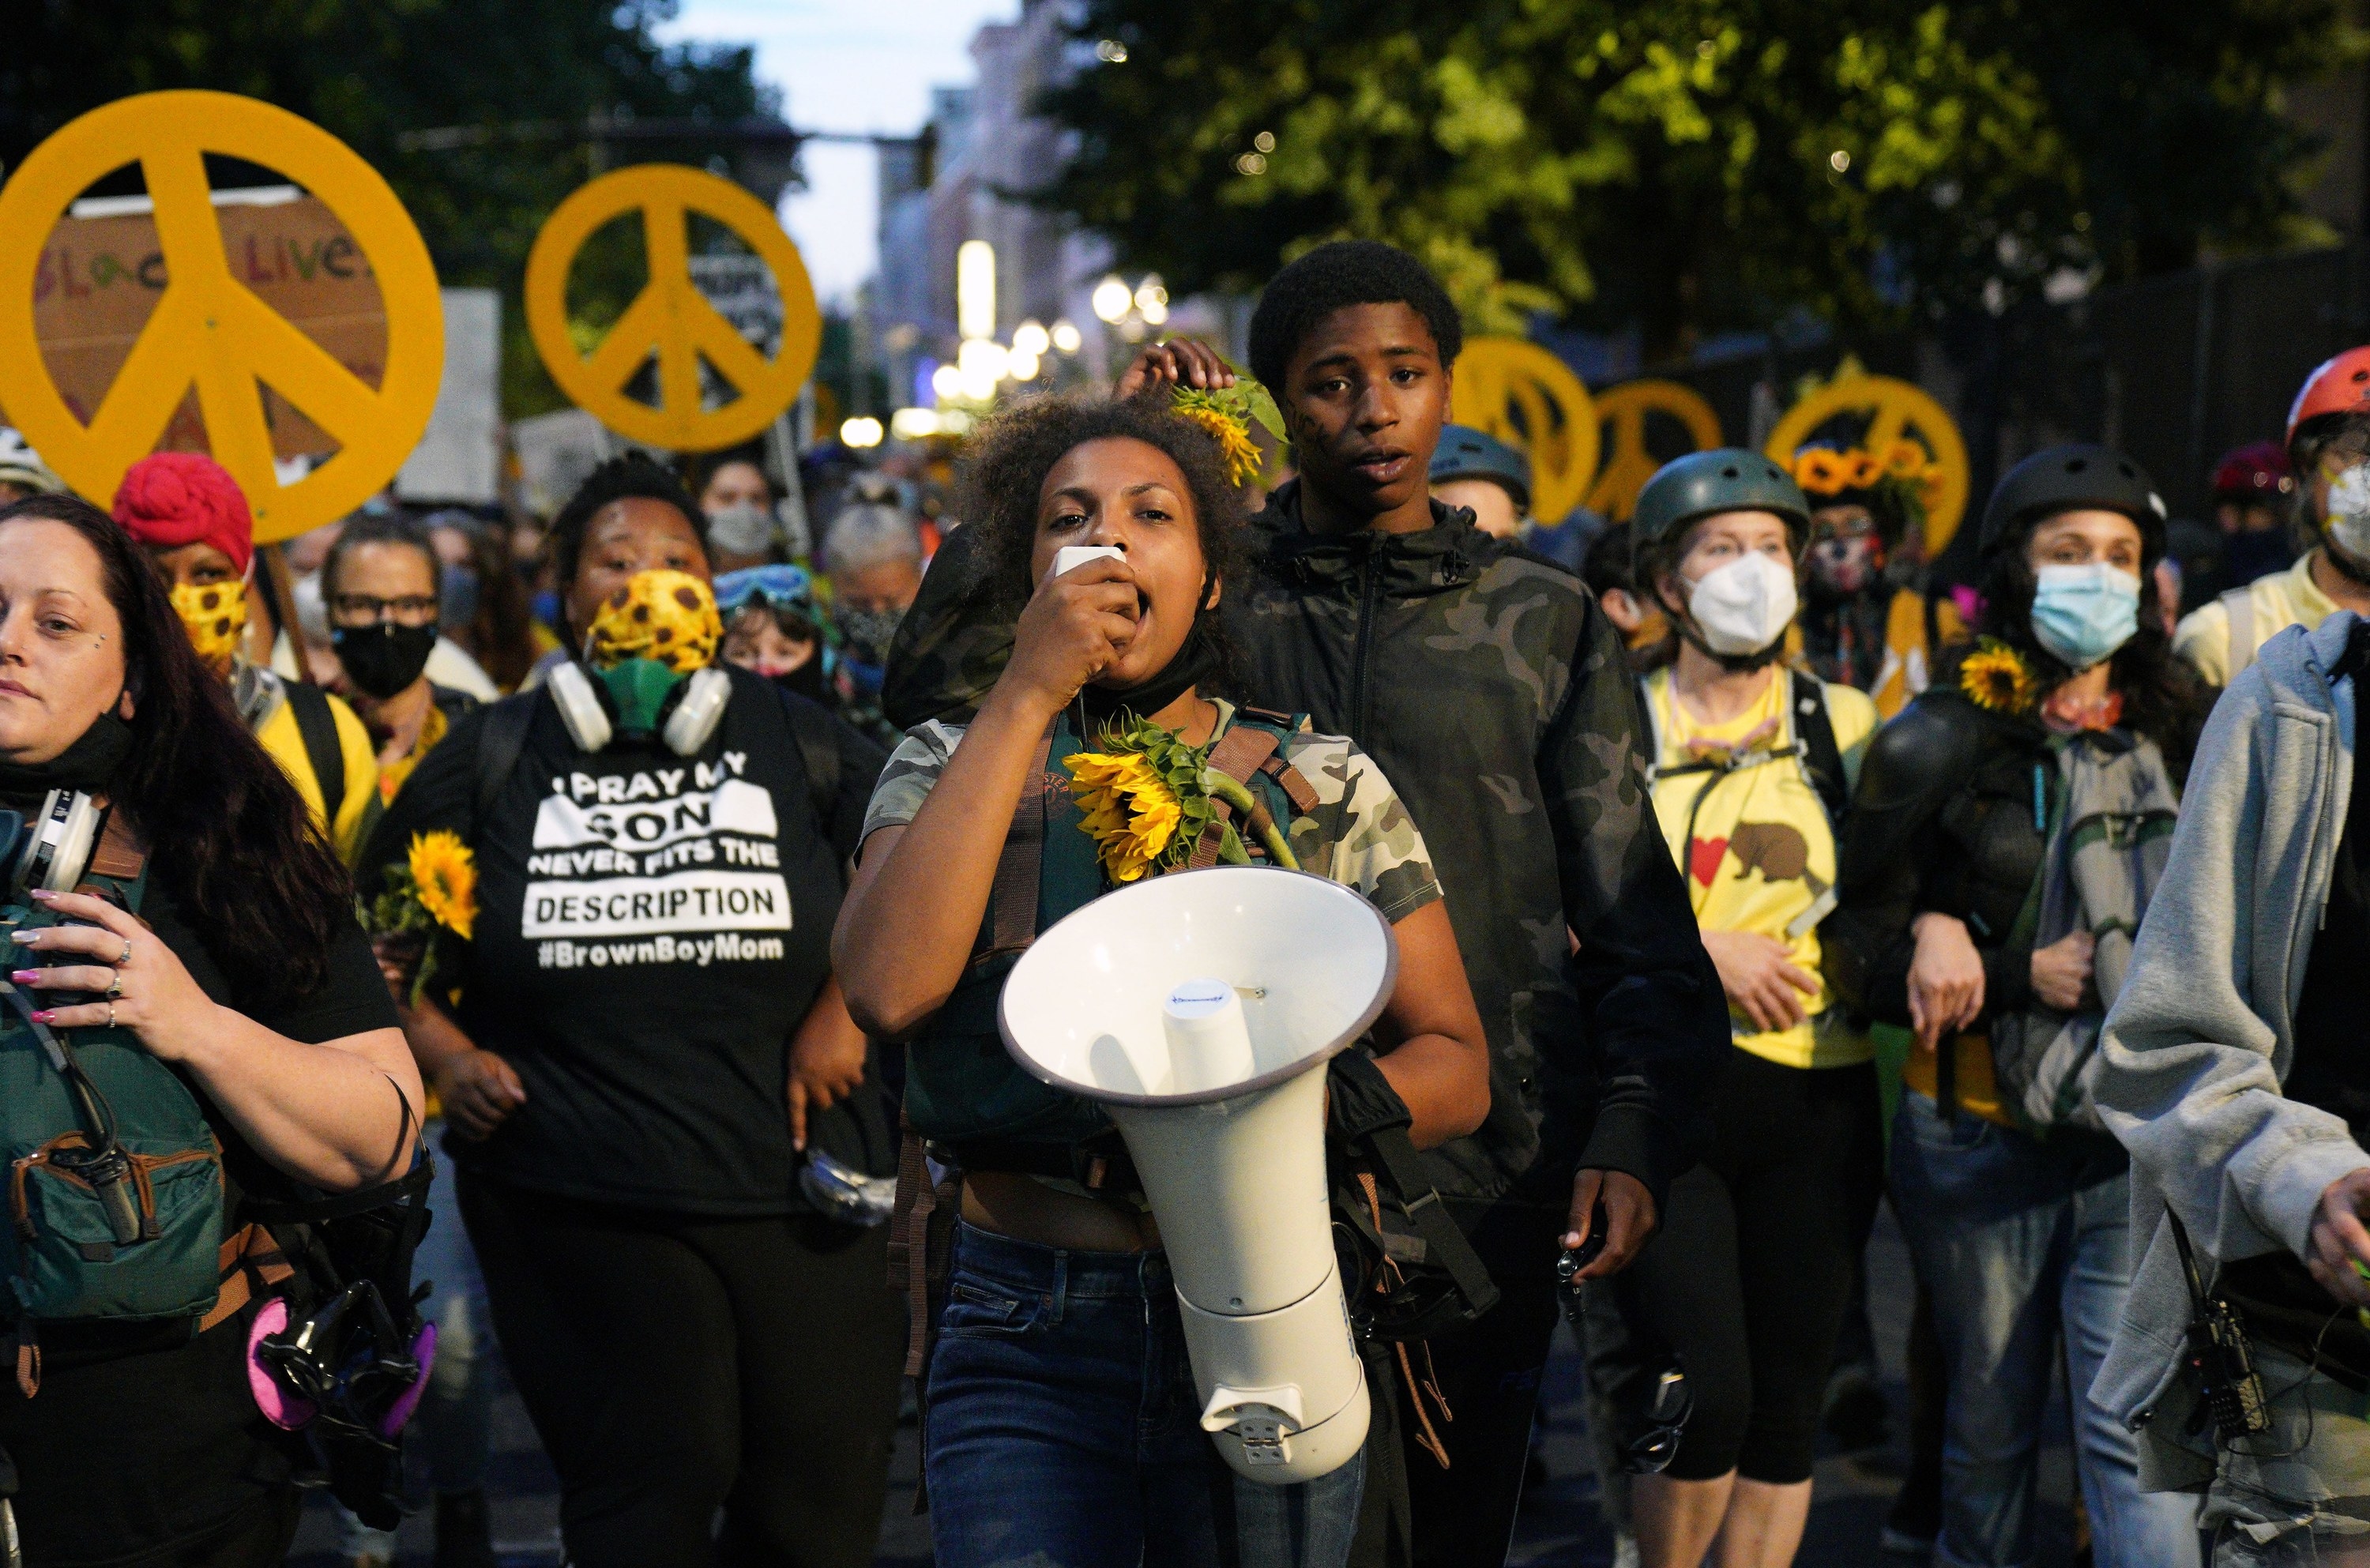 A young Black woman protester speaks into a megaphone in front of a group of demonstrators carrying peace signs